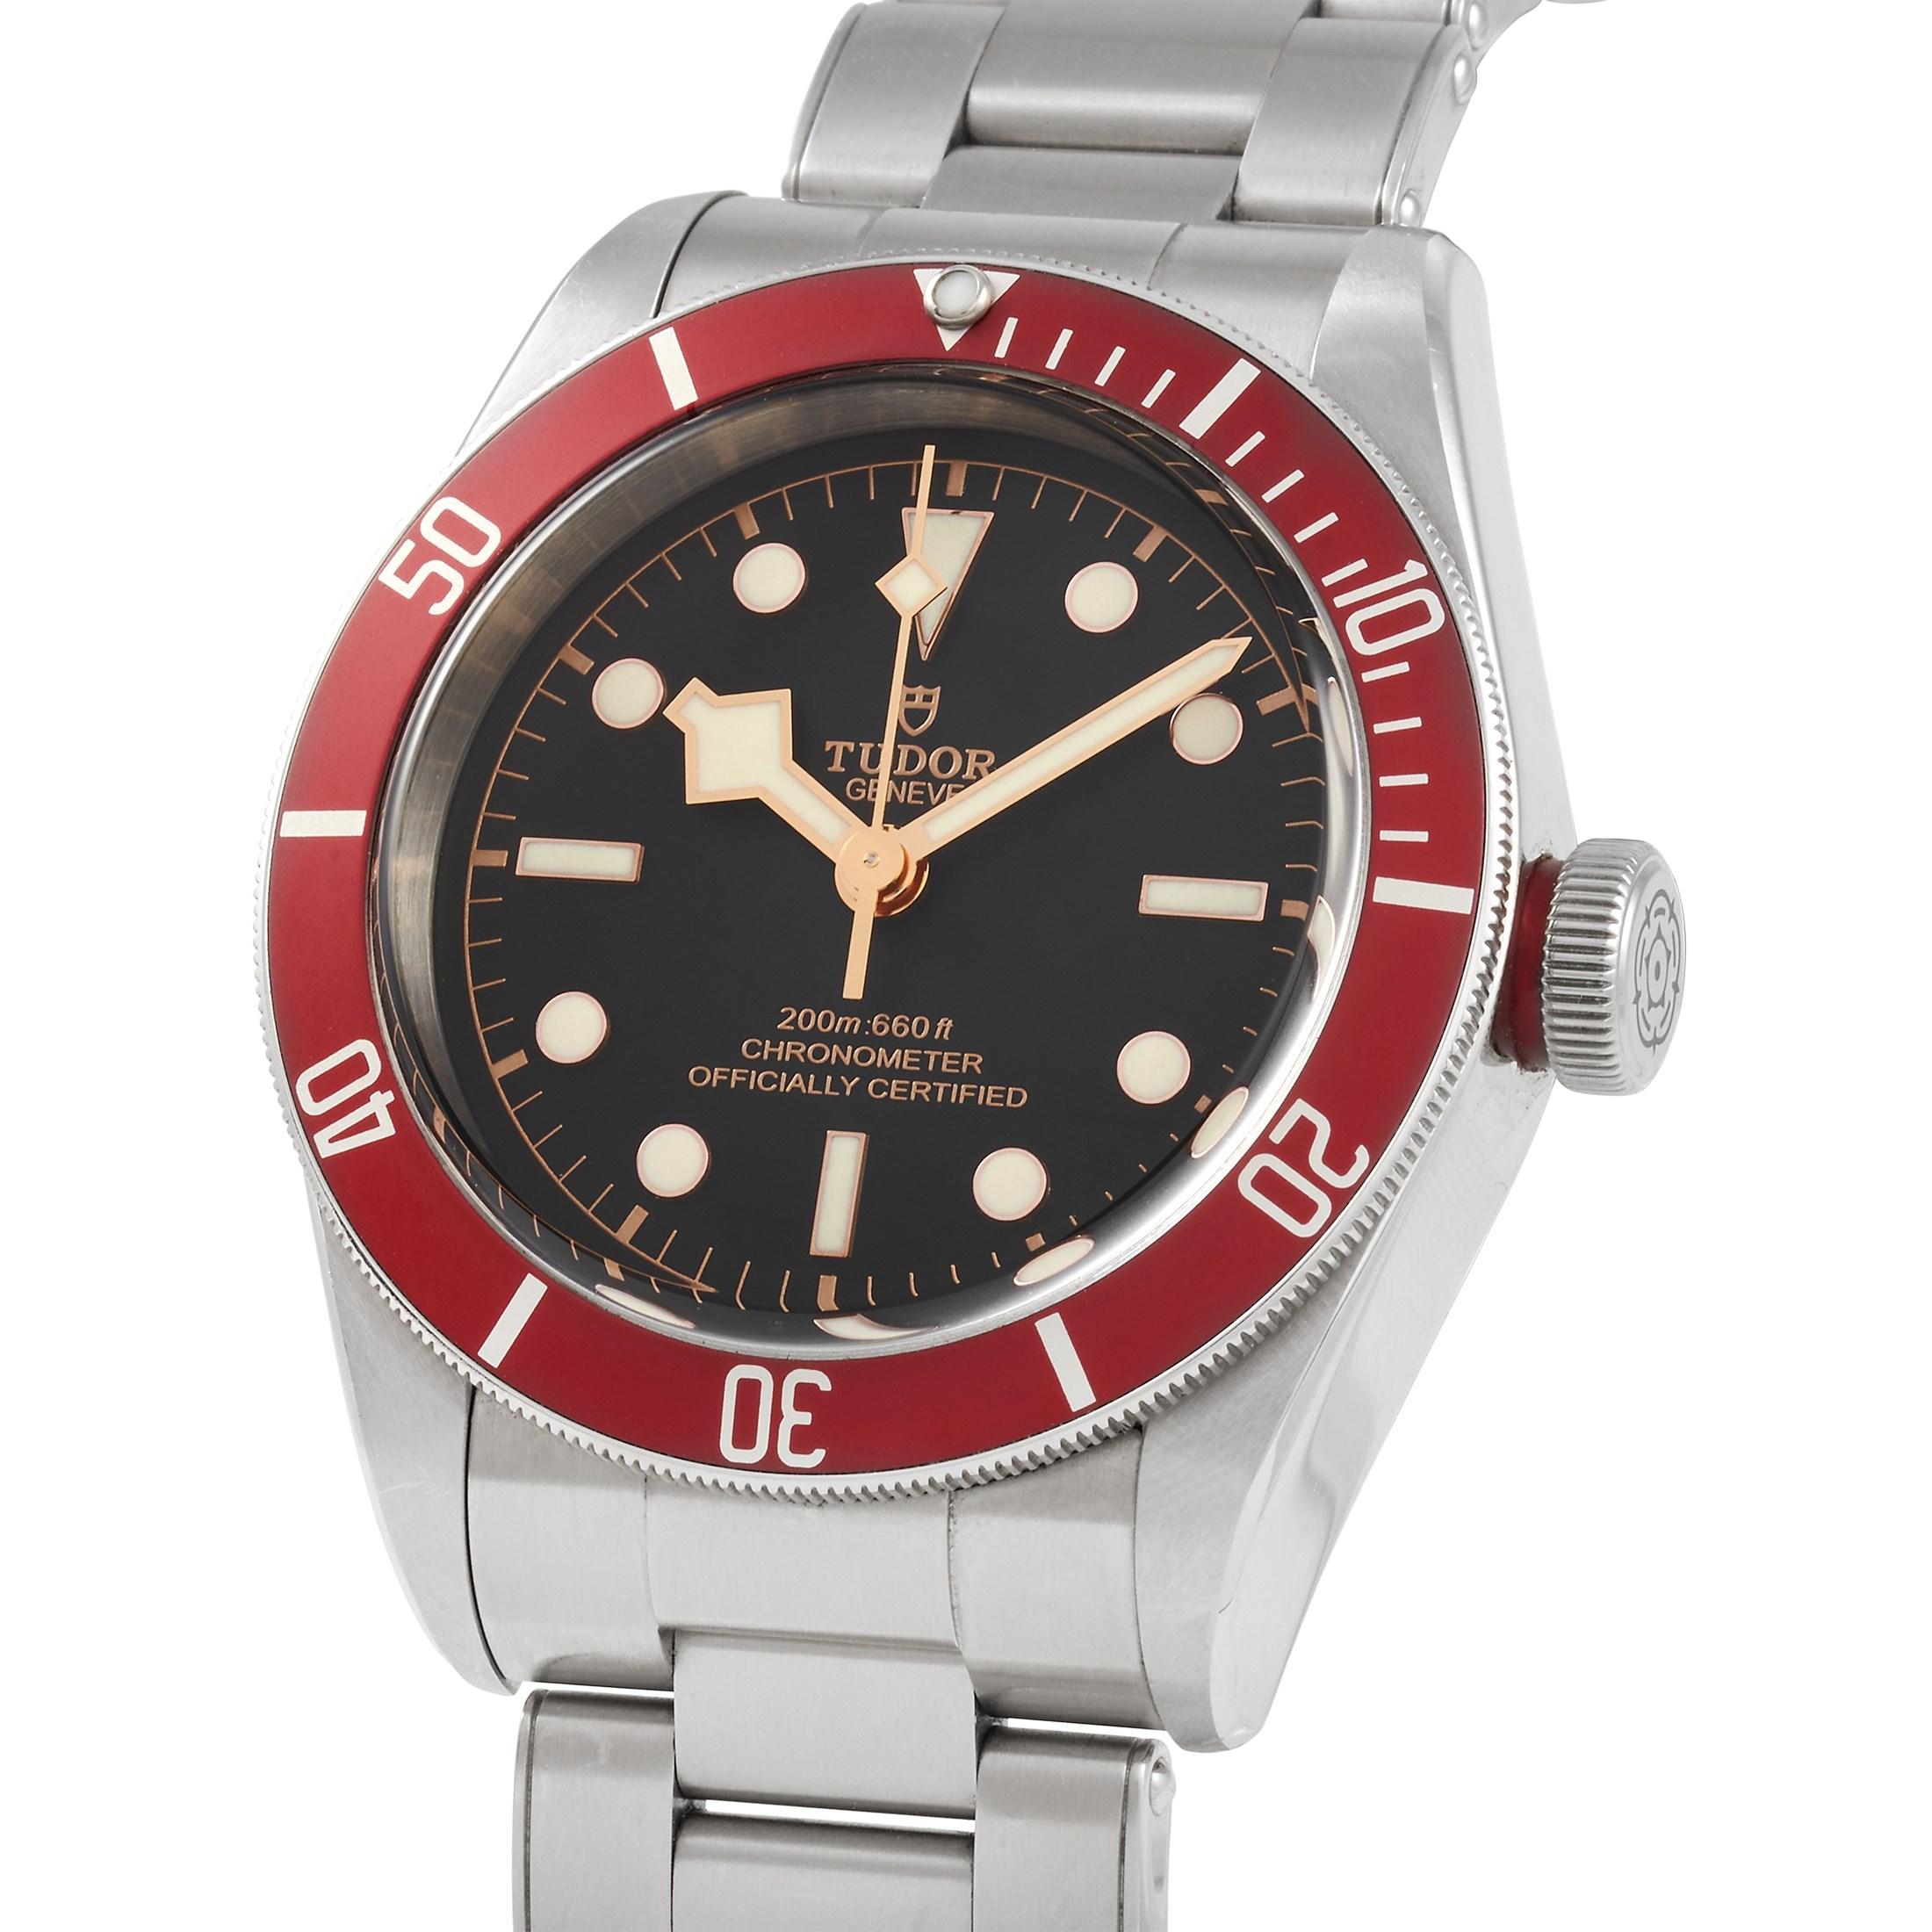 The Tudor Heritage Black Bay Watch, reference number 79230R, is a timepiece filled with special details. A red bezel and a black dial make this a bold, contemporary piece that sets itself apart for all the right reasons.

With a round 41mm case